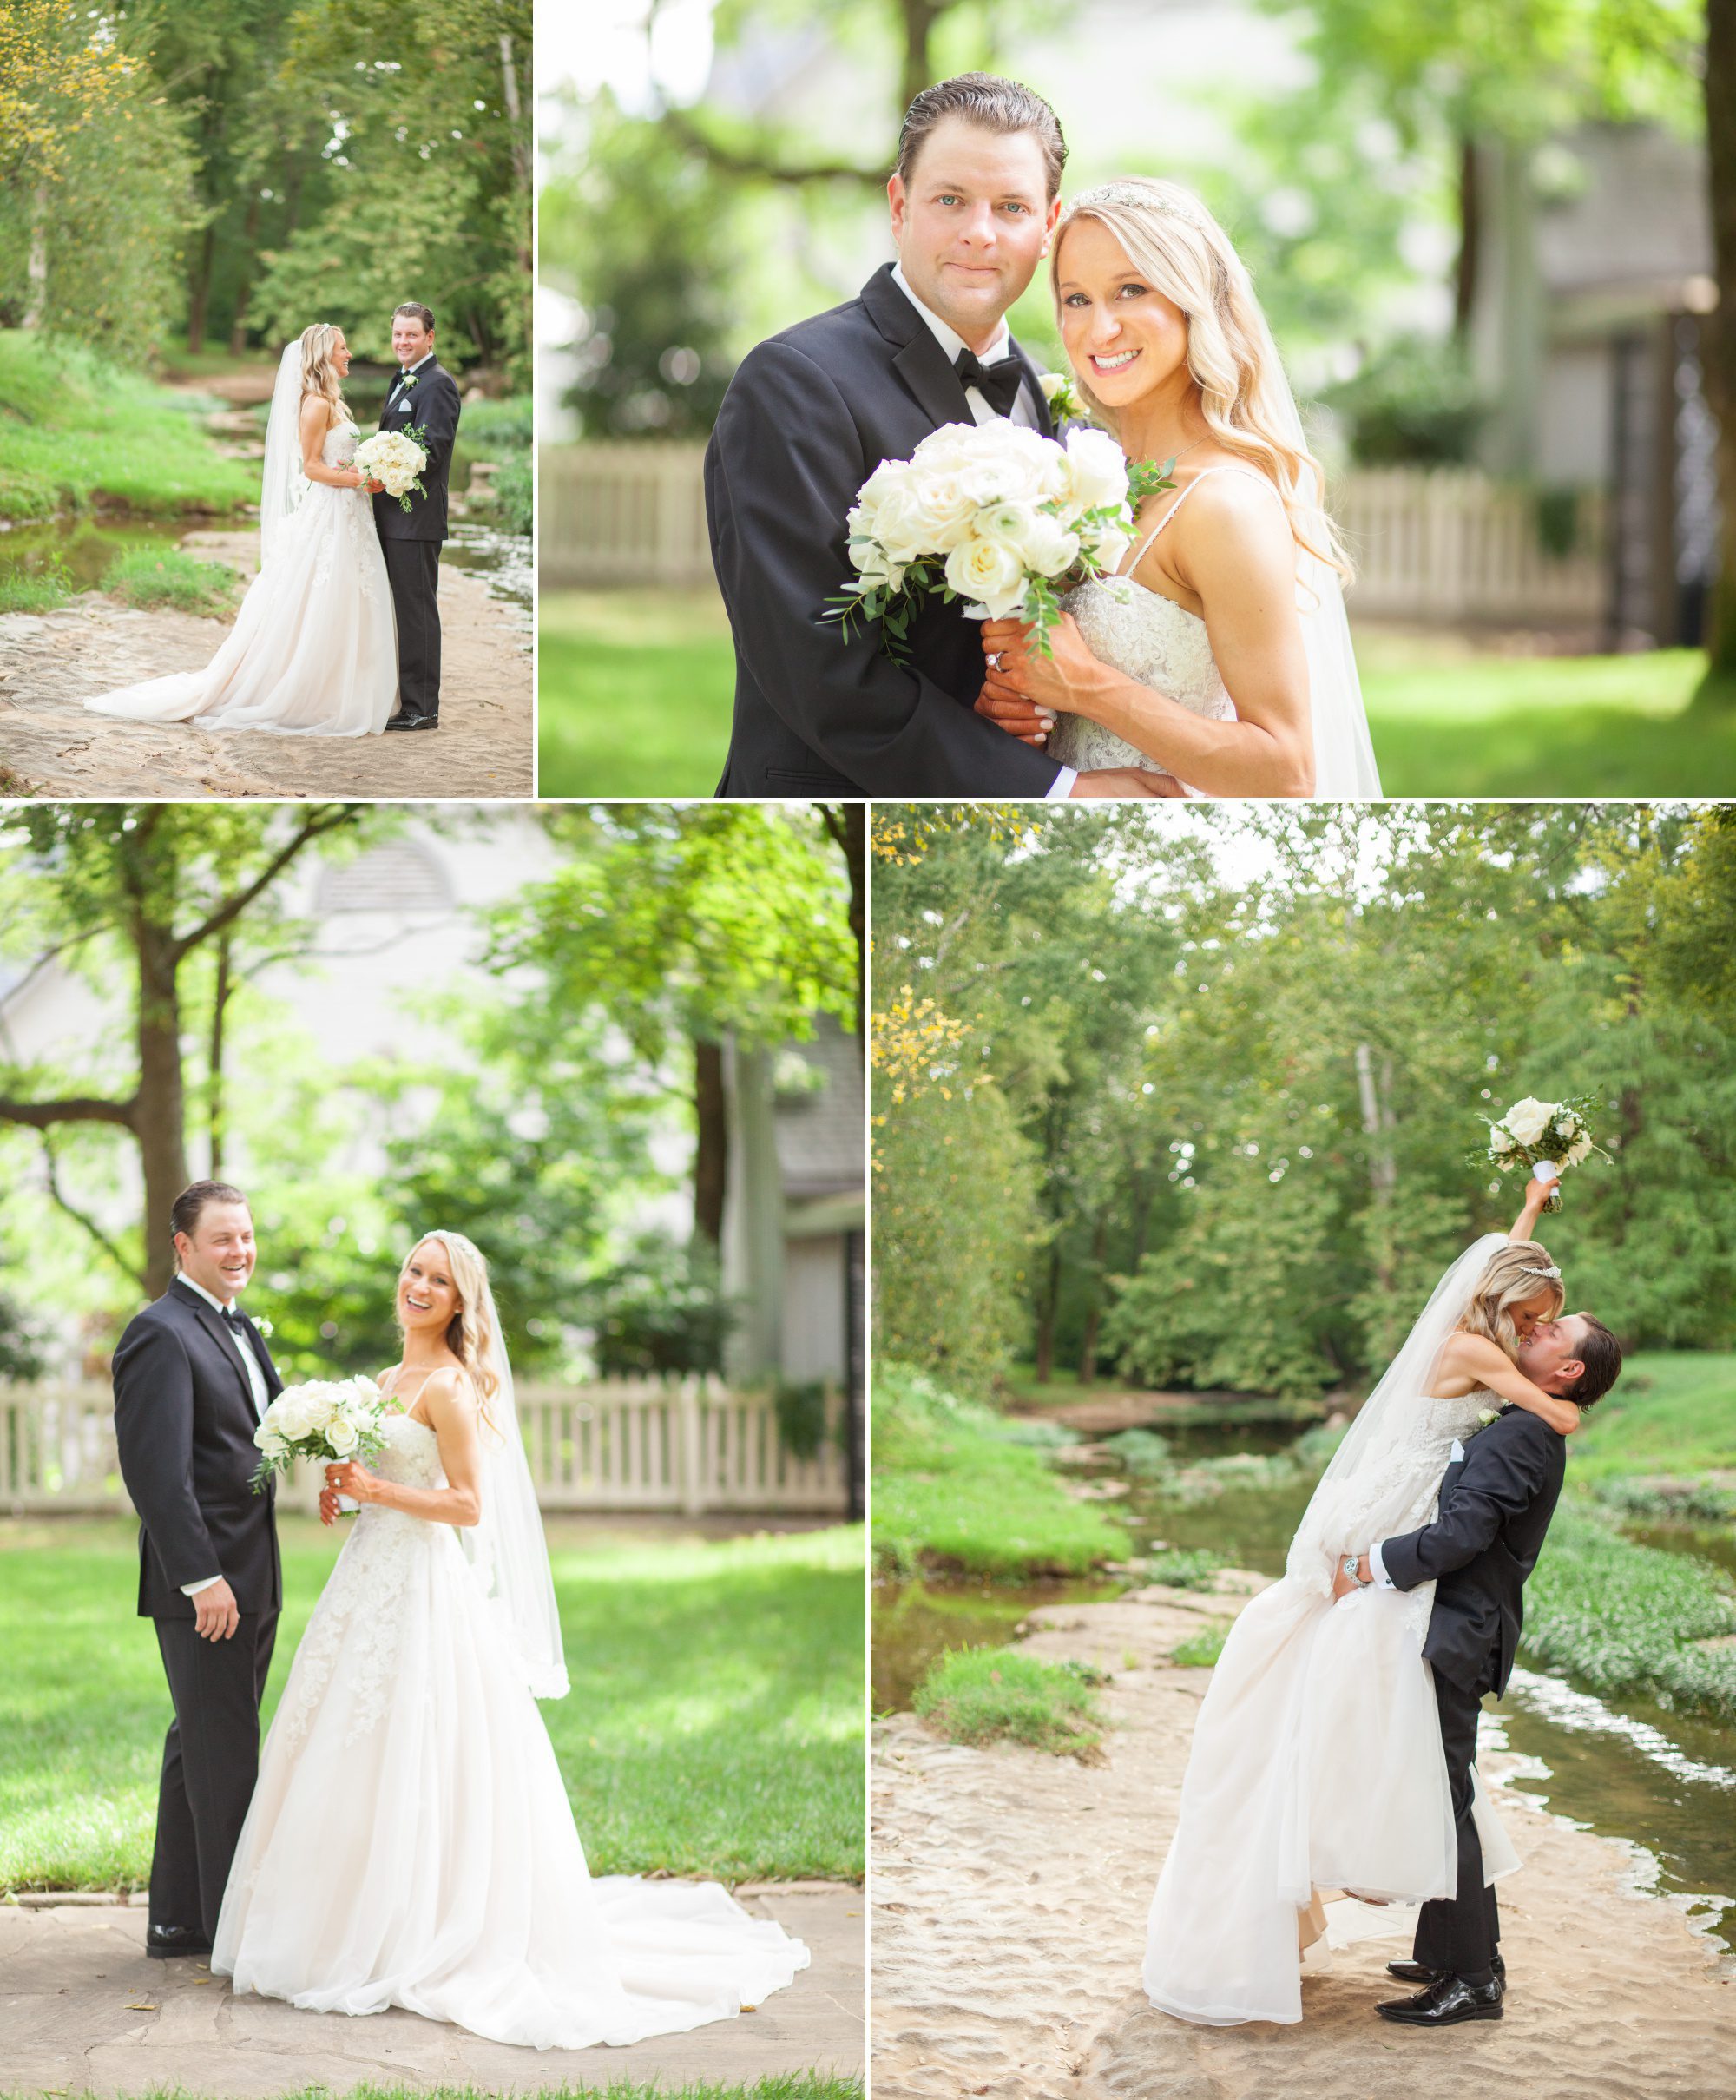 Bride and groom photos before wedding ceremony and reception at Belle Meade Plantation in Nashville, TN. Photos by Krista Lee Photography 